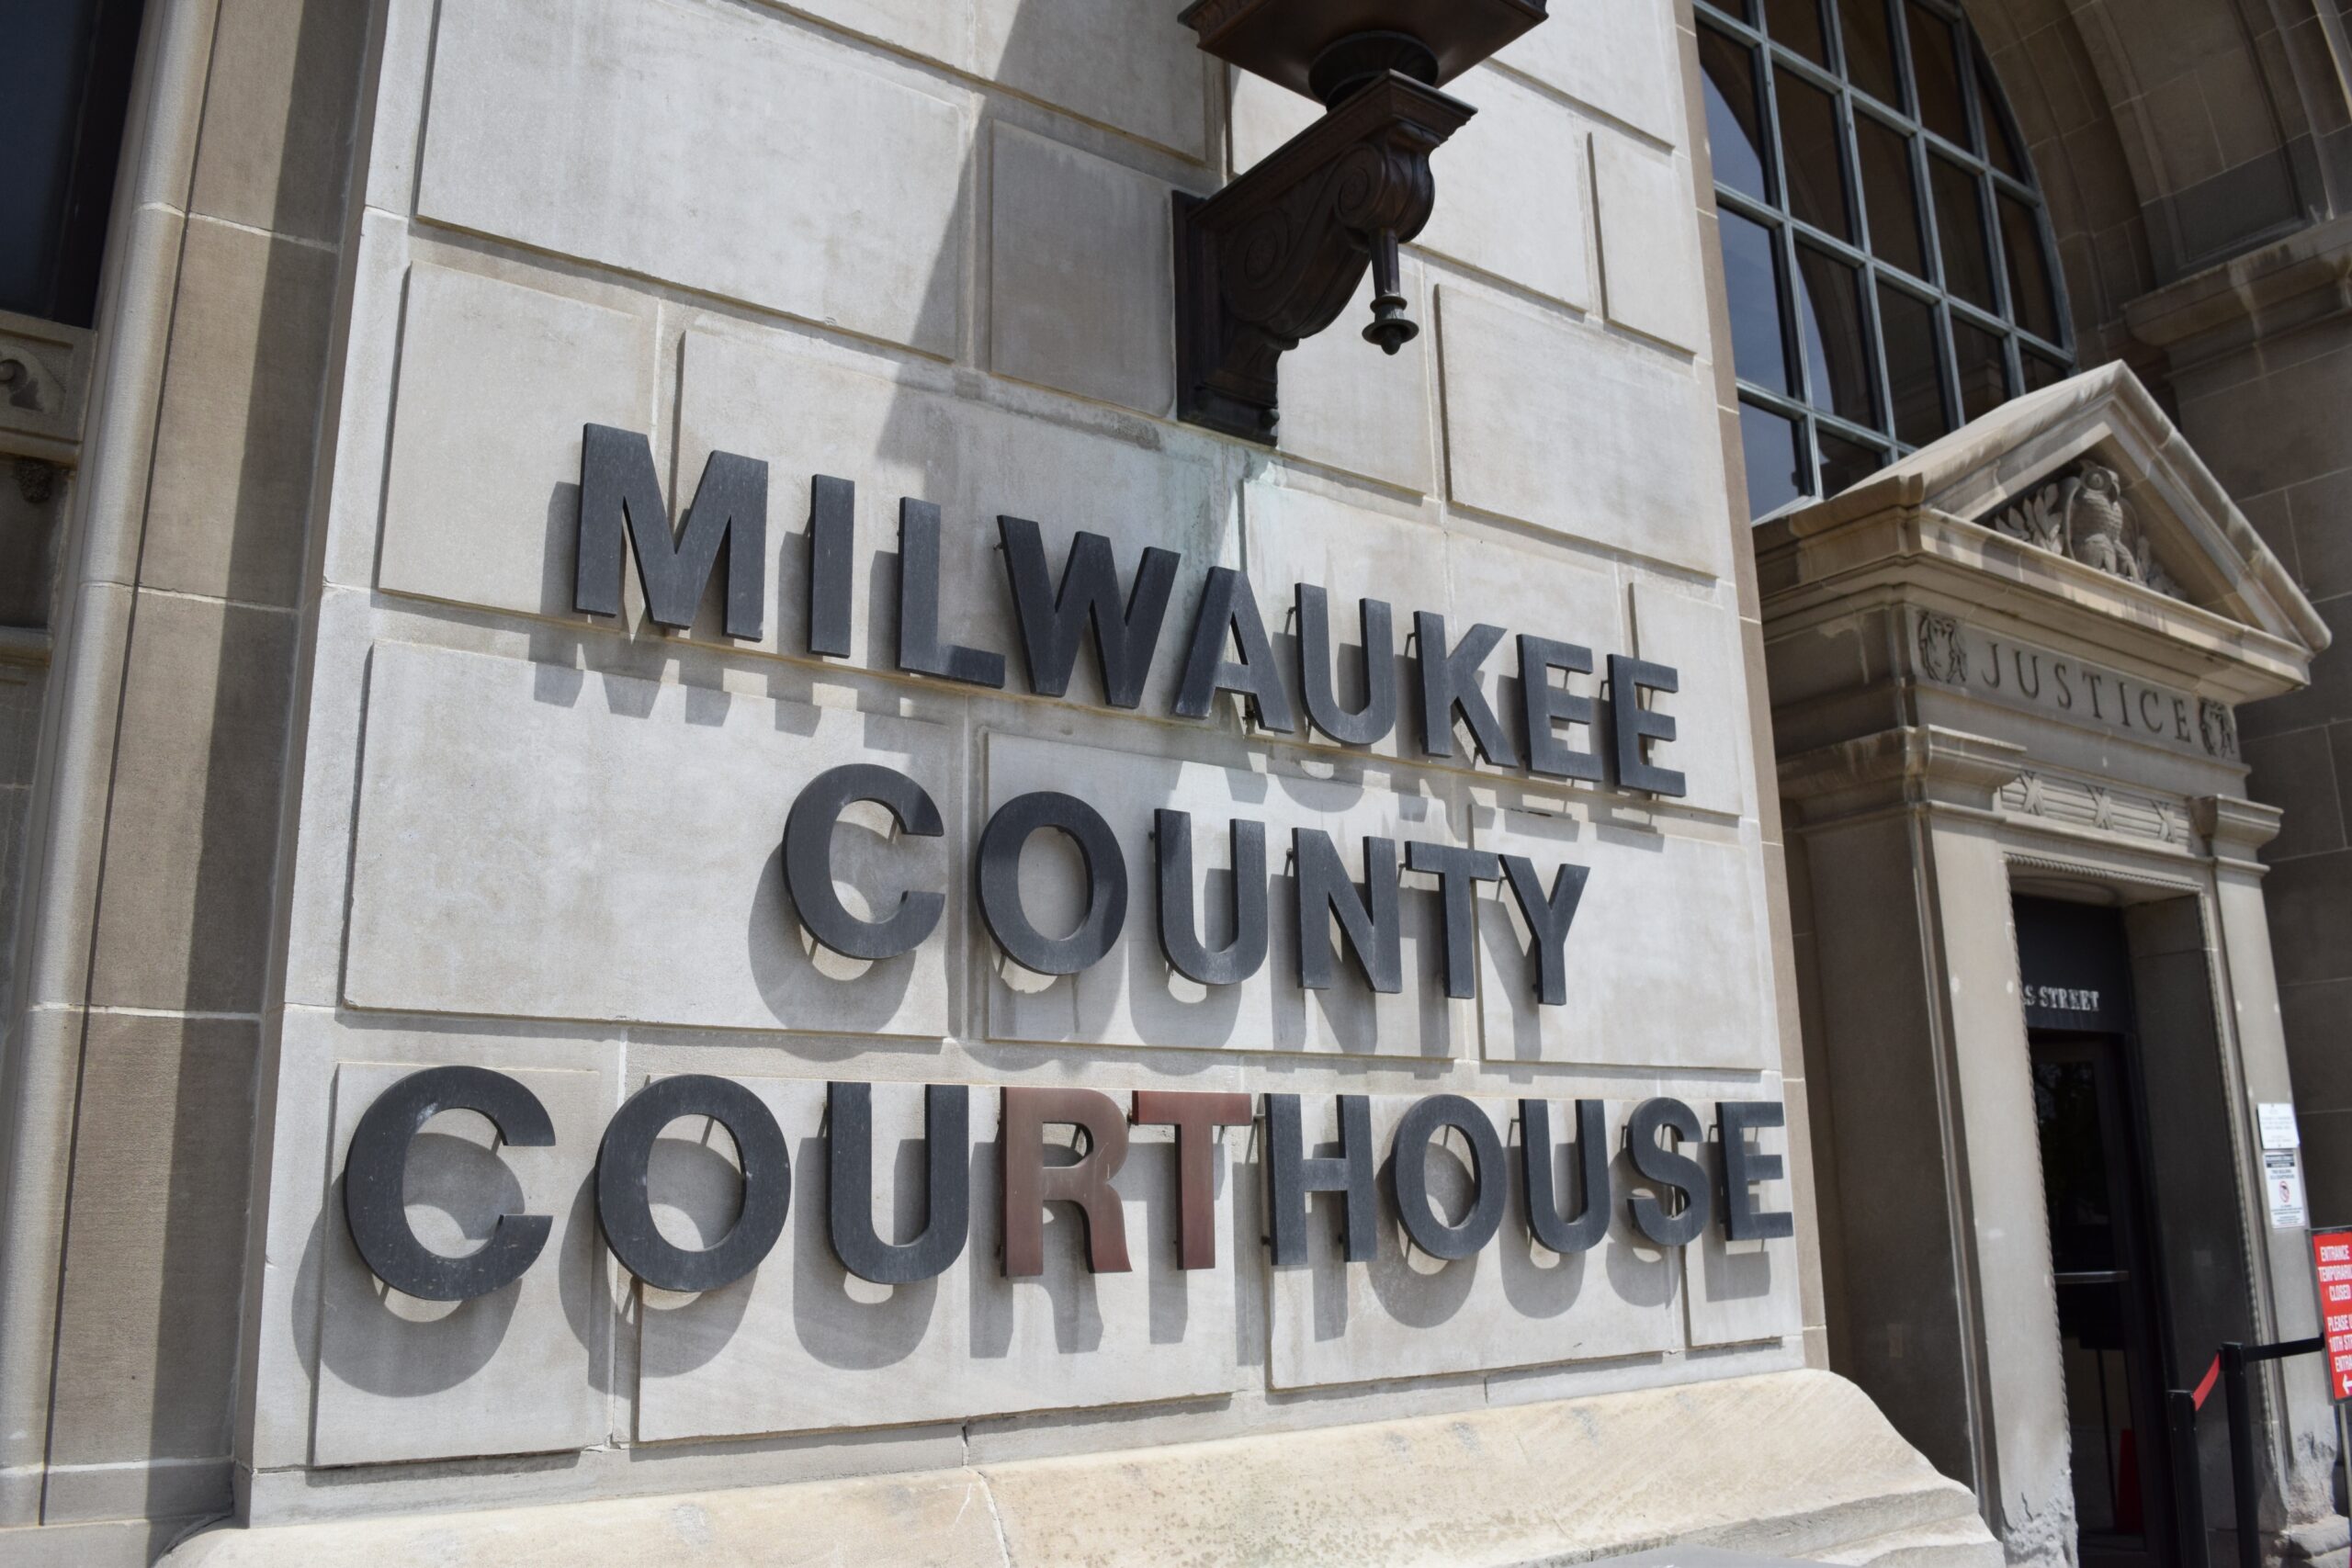 Trial underway for former Milwaukee election official charged with election fraud